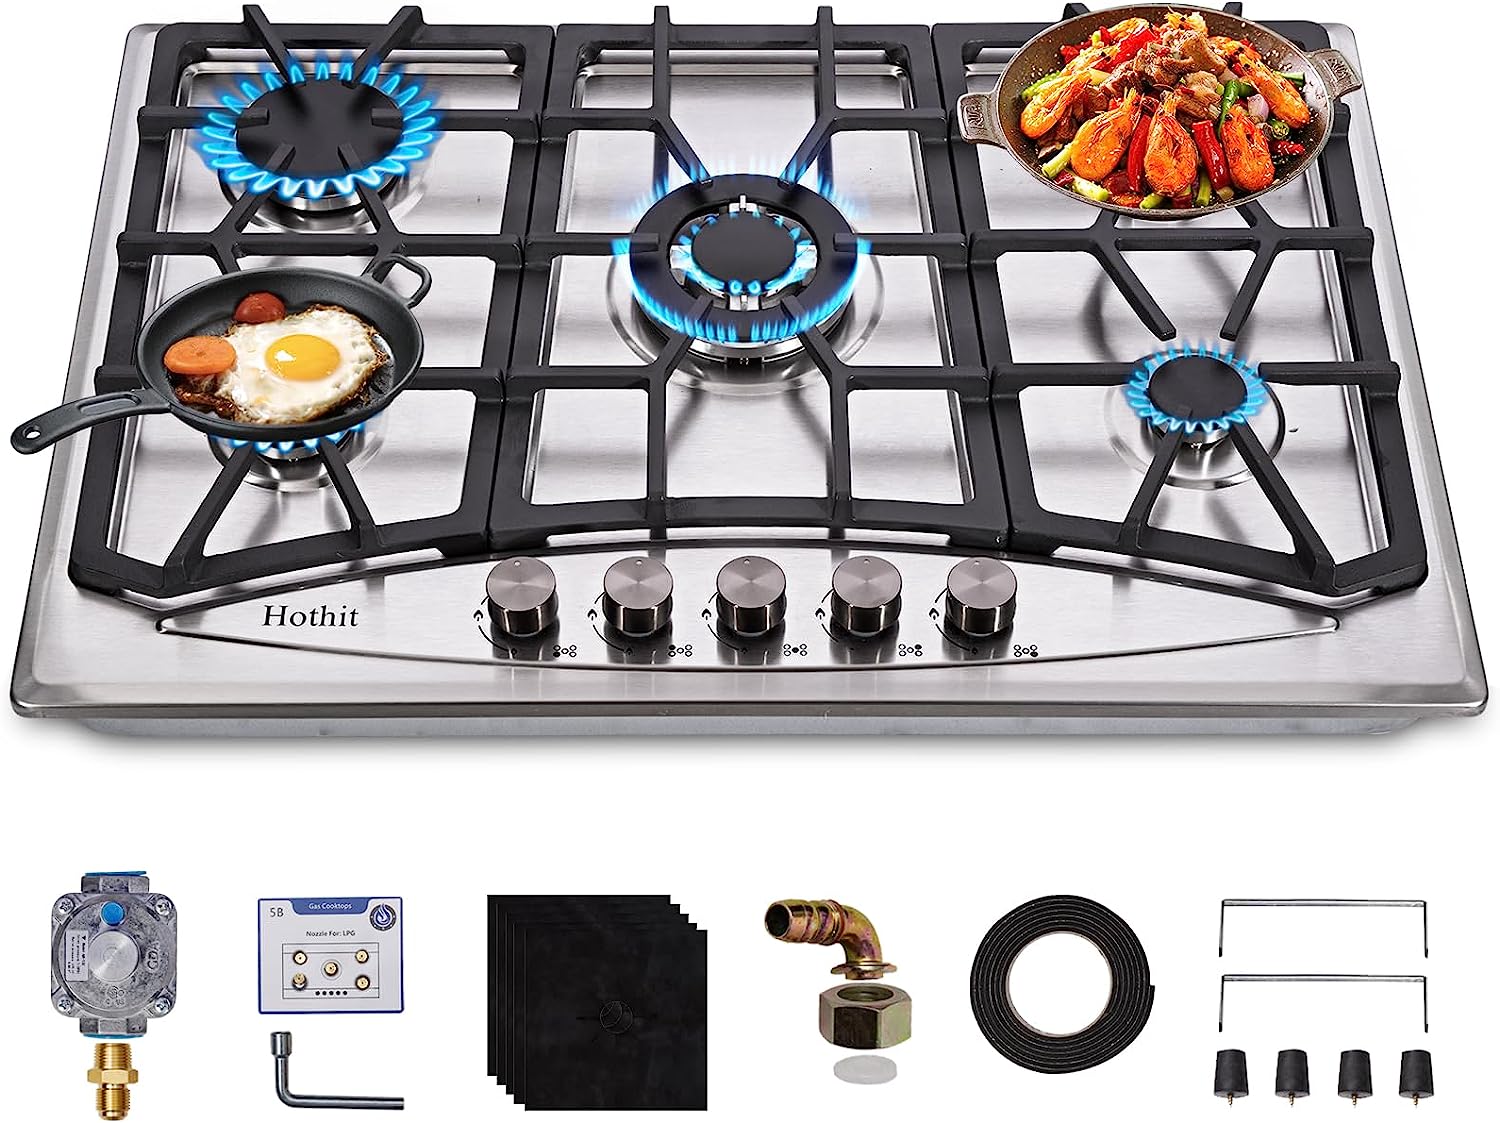 Hothit Propane Gas Cooktop 30